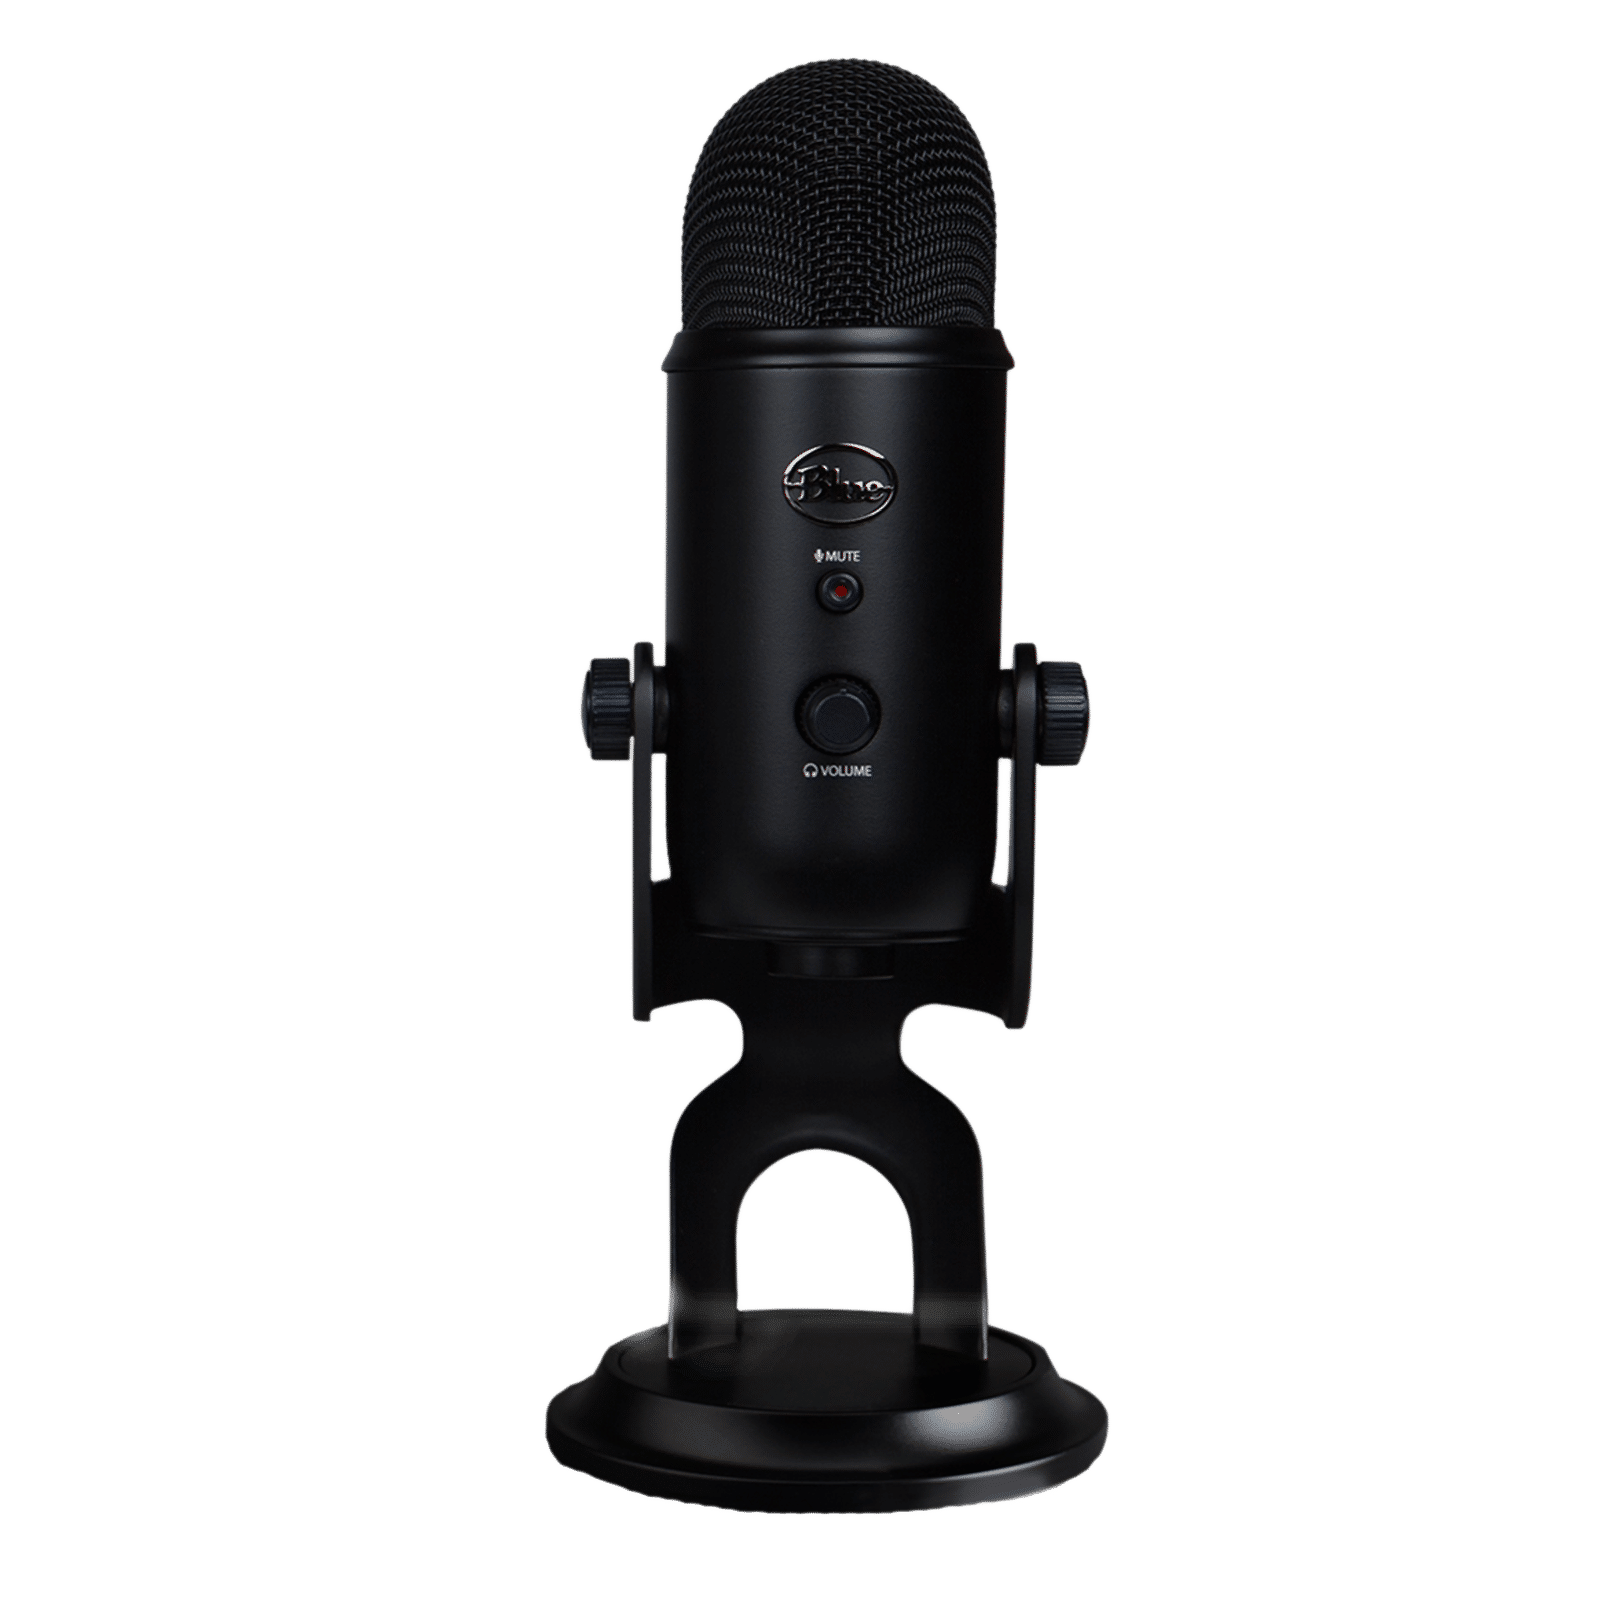 Deco Gear PC Microphone for Gaming, Streaming, Singing, Recording, Mee